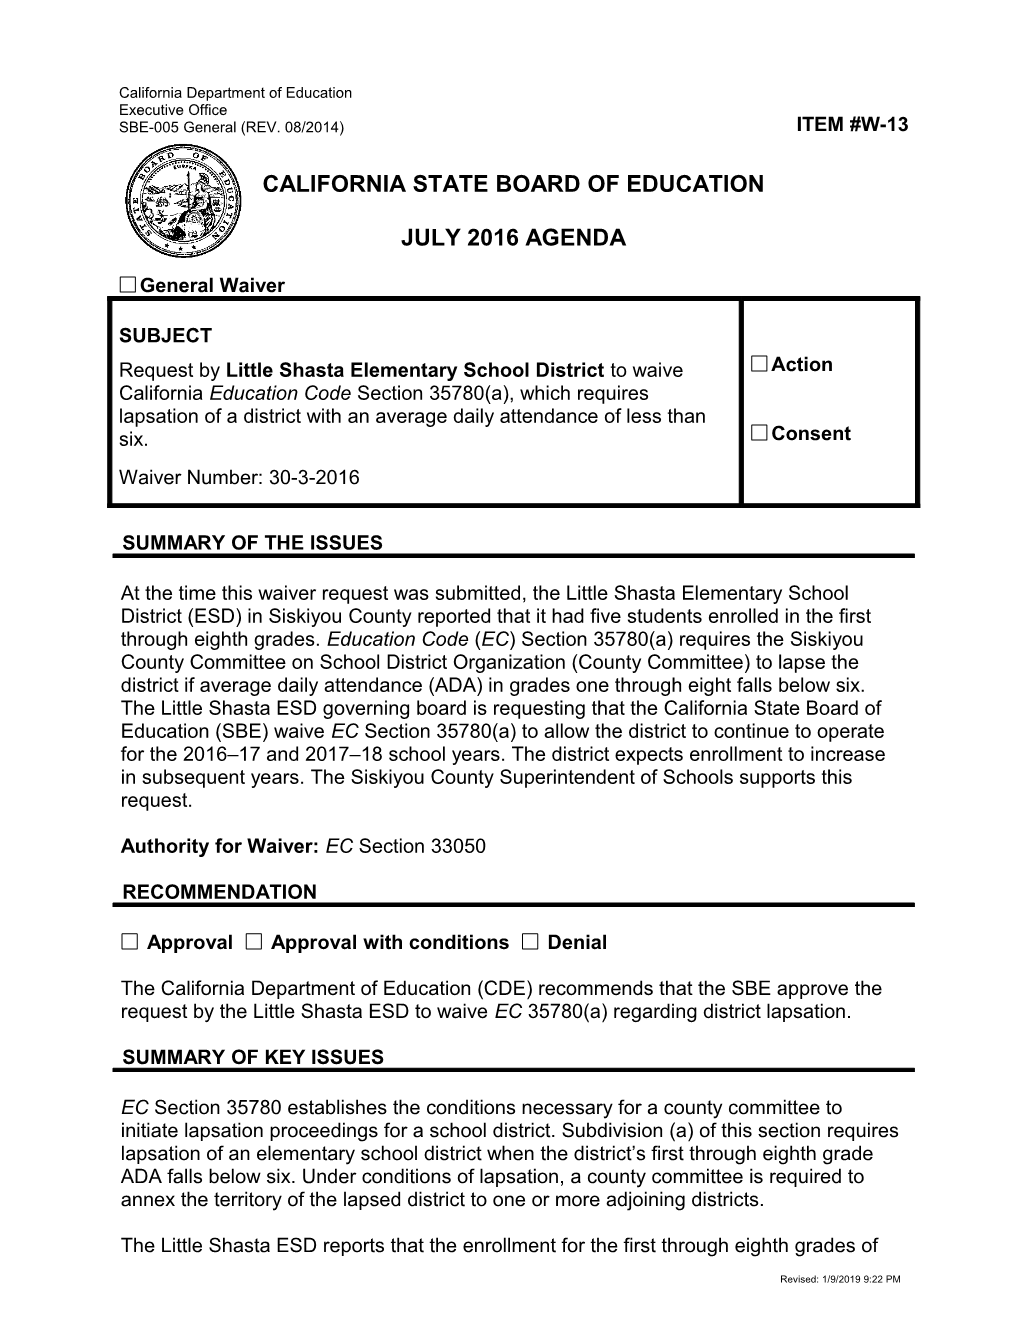 July 2016 Waiver Item W-13 - Meeting Agendas (CA State Board of Education)